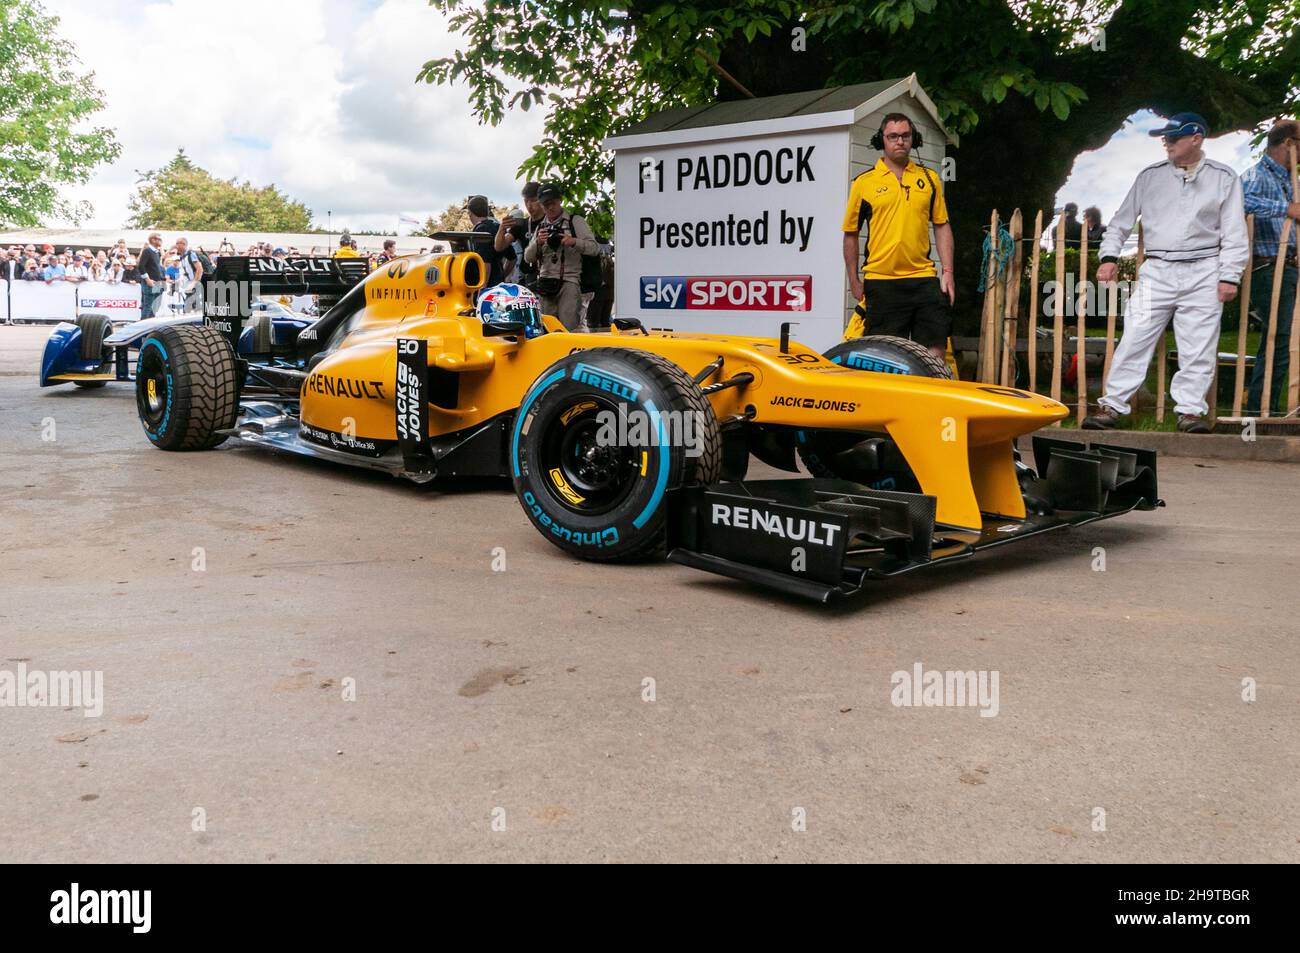 Renault Sport E20 Formula 1, Grand Prix car leaving the assembly area for the hill climb at the Goodwood Festival of Speed, UK, 2016. Lotus E20 2012 Stock Photo